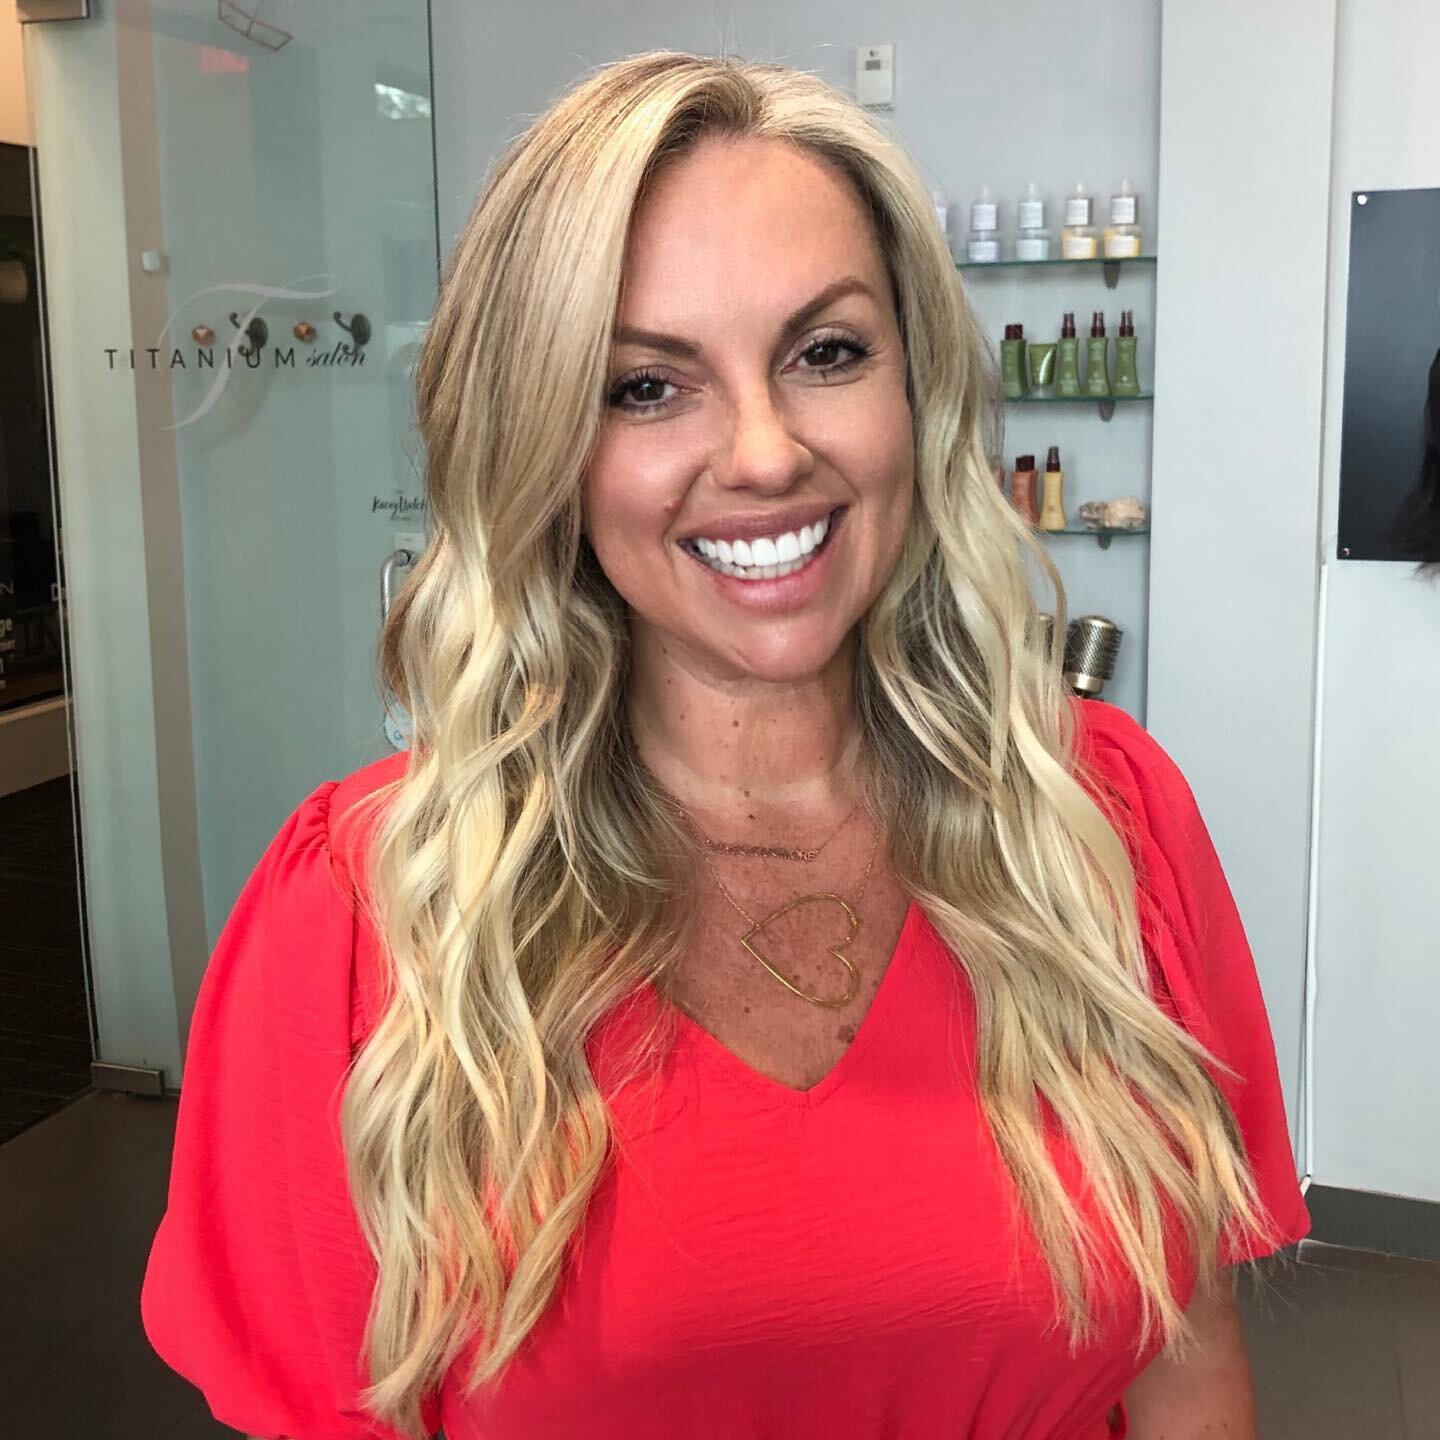 This smile says it all🌟
She is beaming from ear to ear! That&rsquo;s how great hair can make you feel. UNSTOPPABLE! This wonderful woman and mamma is a badass and I was so thrilled to elevate her hair game! 
I did new fresh highlights and evened out